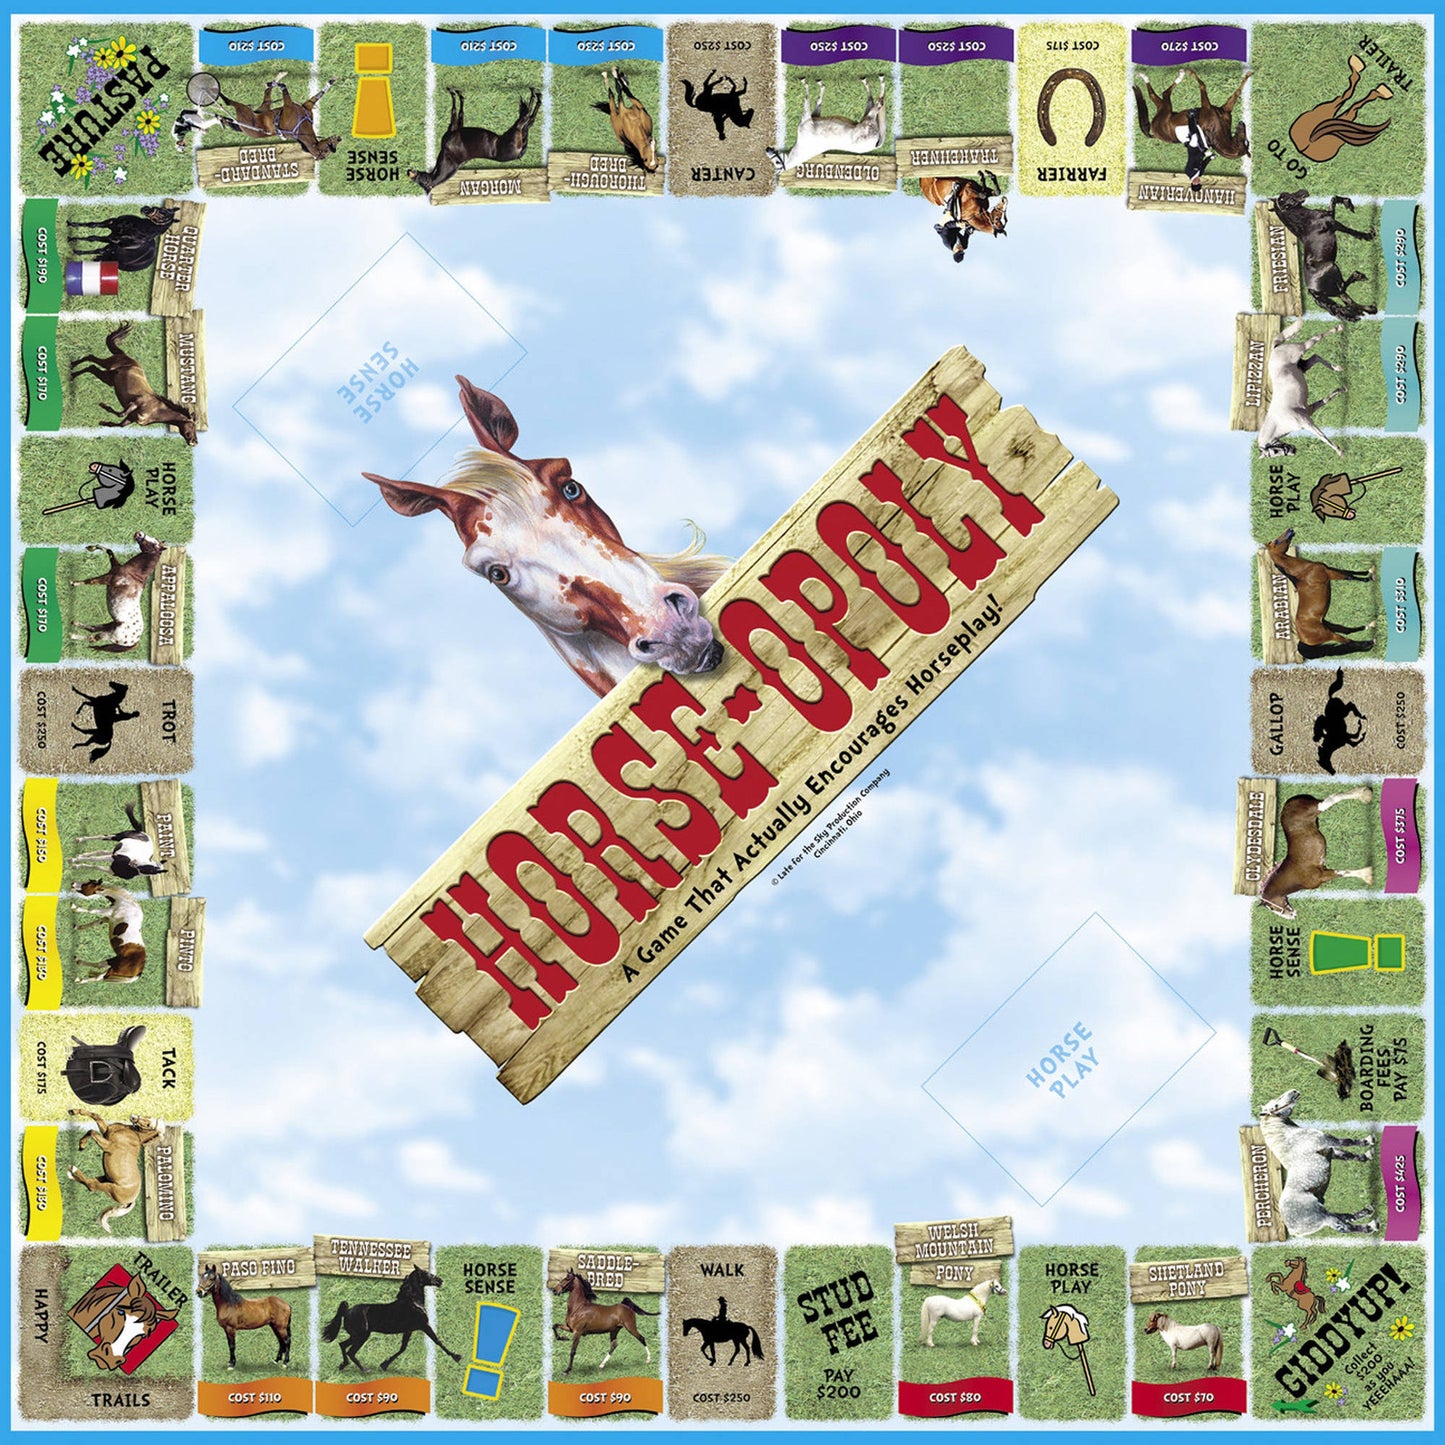 A view from above of the board game Horse-opoly.